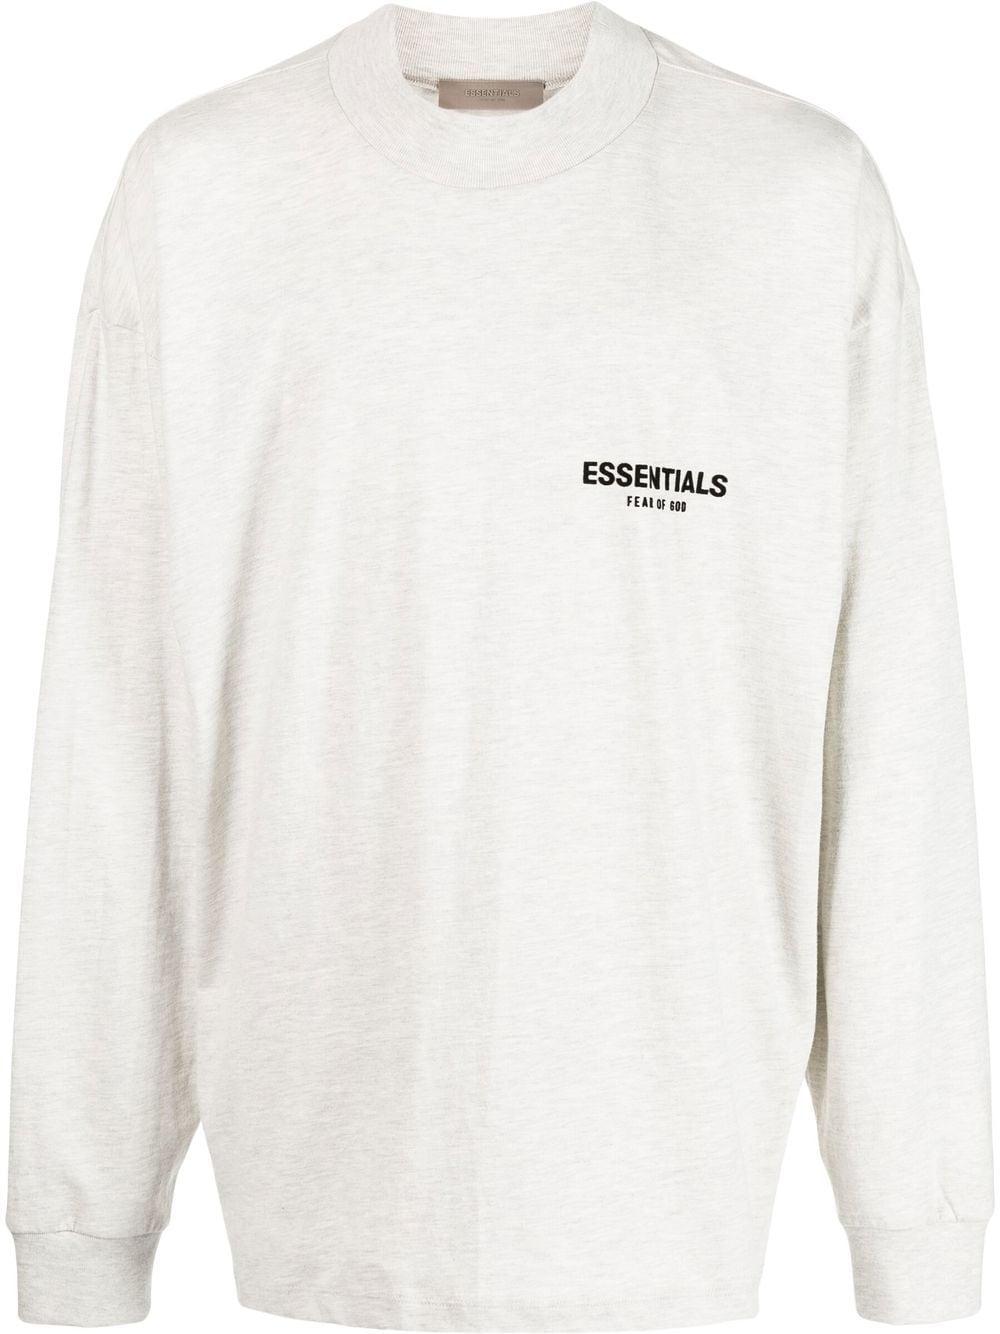 Fear Of God Essentials Long-sleeve T-shirt in White for Men